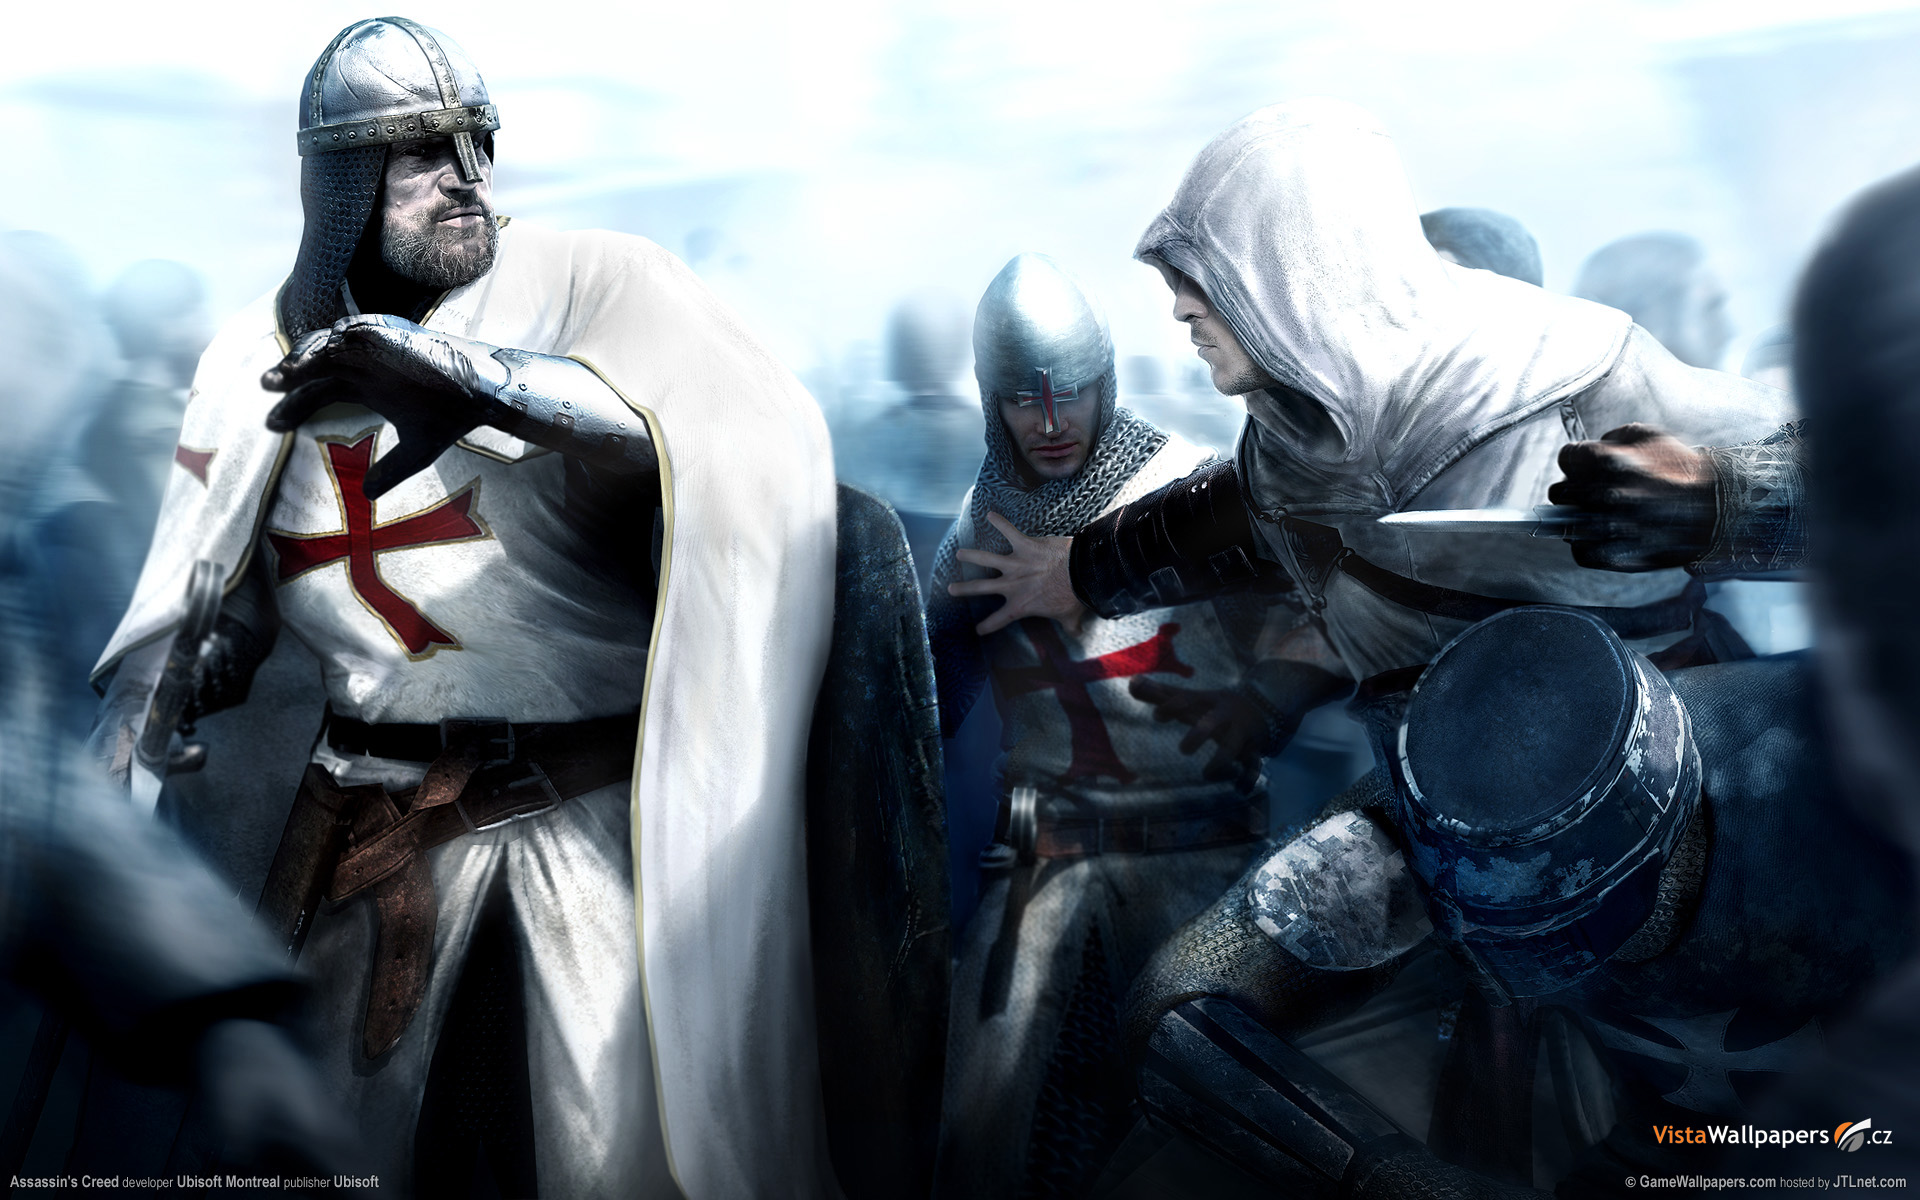 Download High quality Assassins Creed wallpaper / Games / 1920x1200